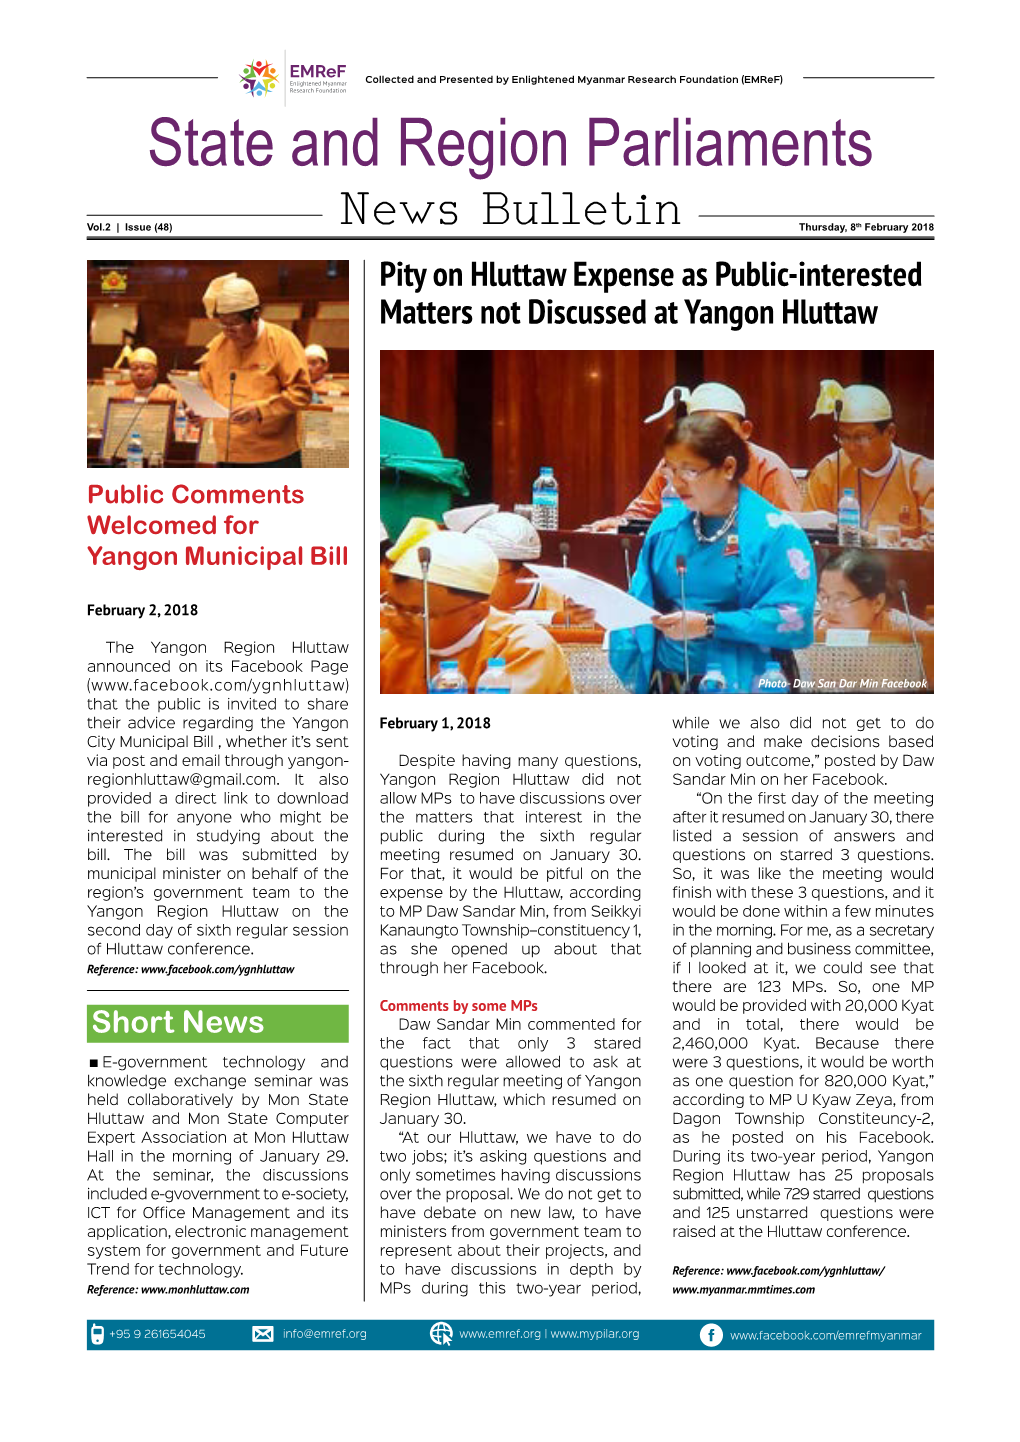 State and Region Parliaments News Bulletin Vol.2, Issue 48